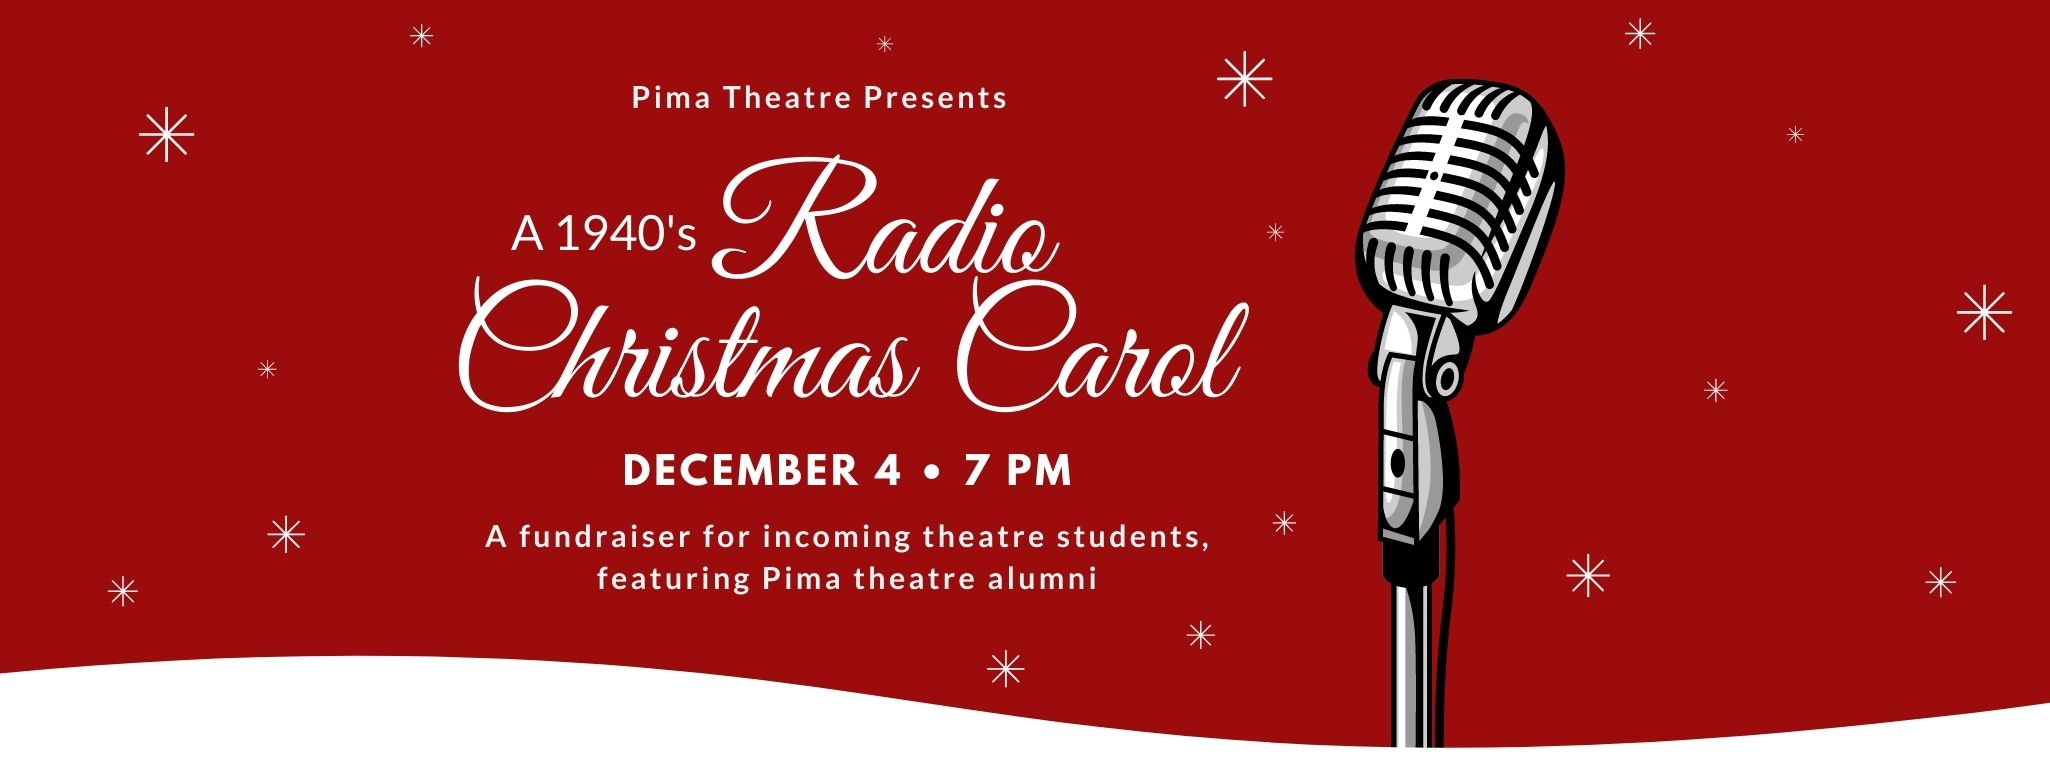 Radio Christmas Carol Event Flyer - red background with white stars and retro microphone